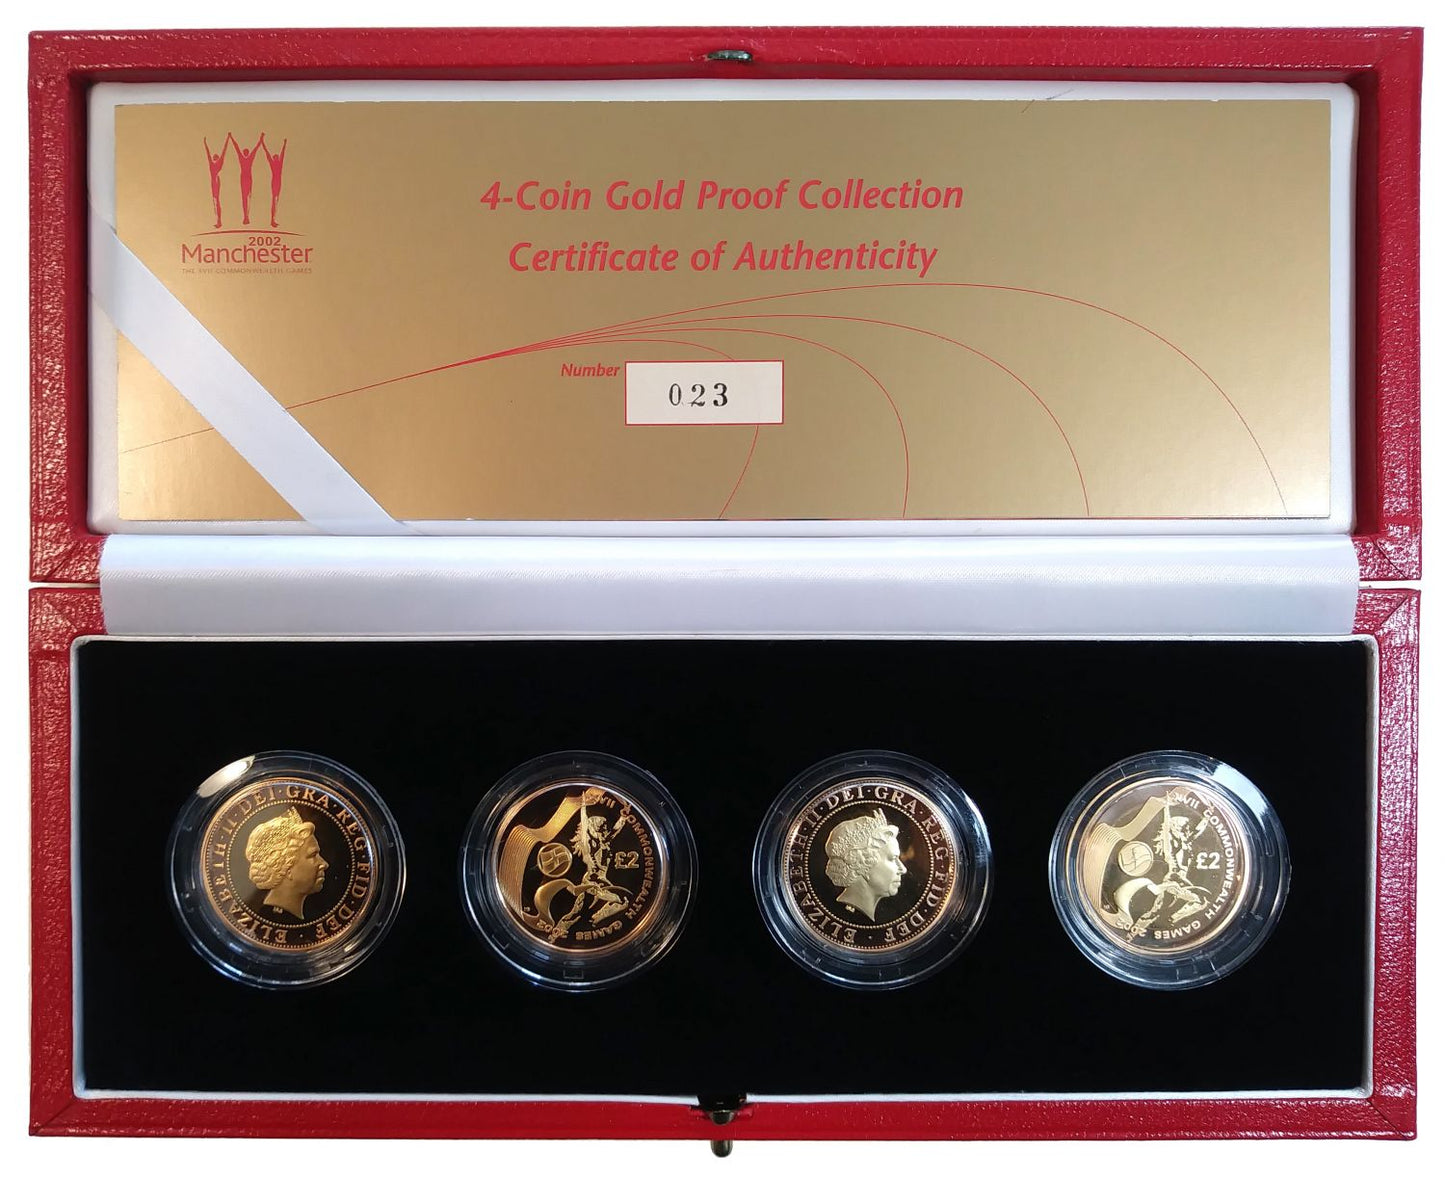 Elizabeth II 2002 Commonwealth Games proof gold Two Pounds four coin Set